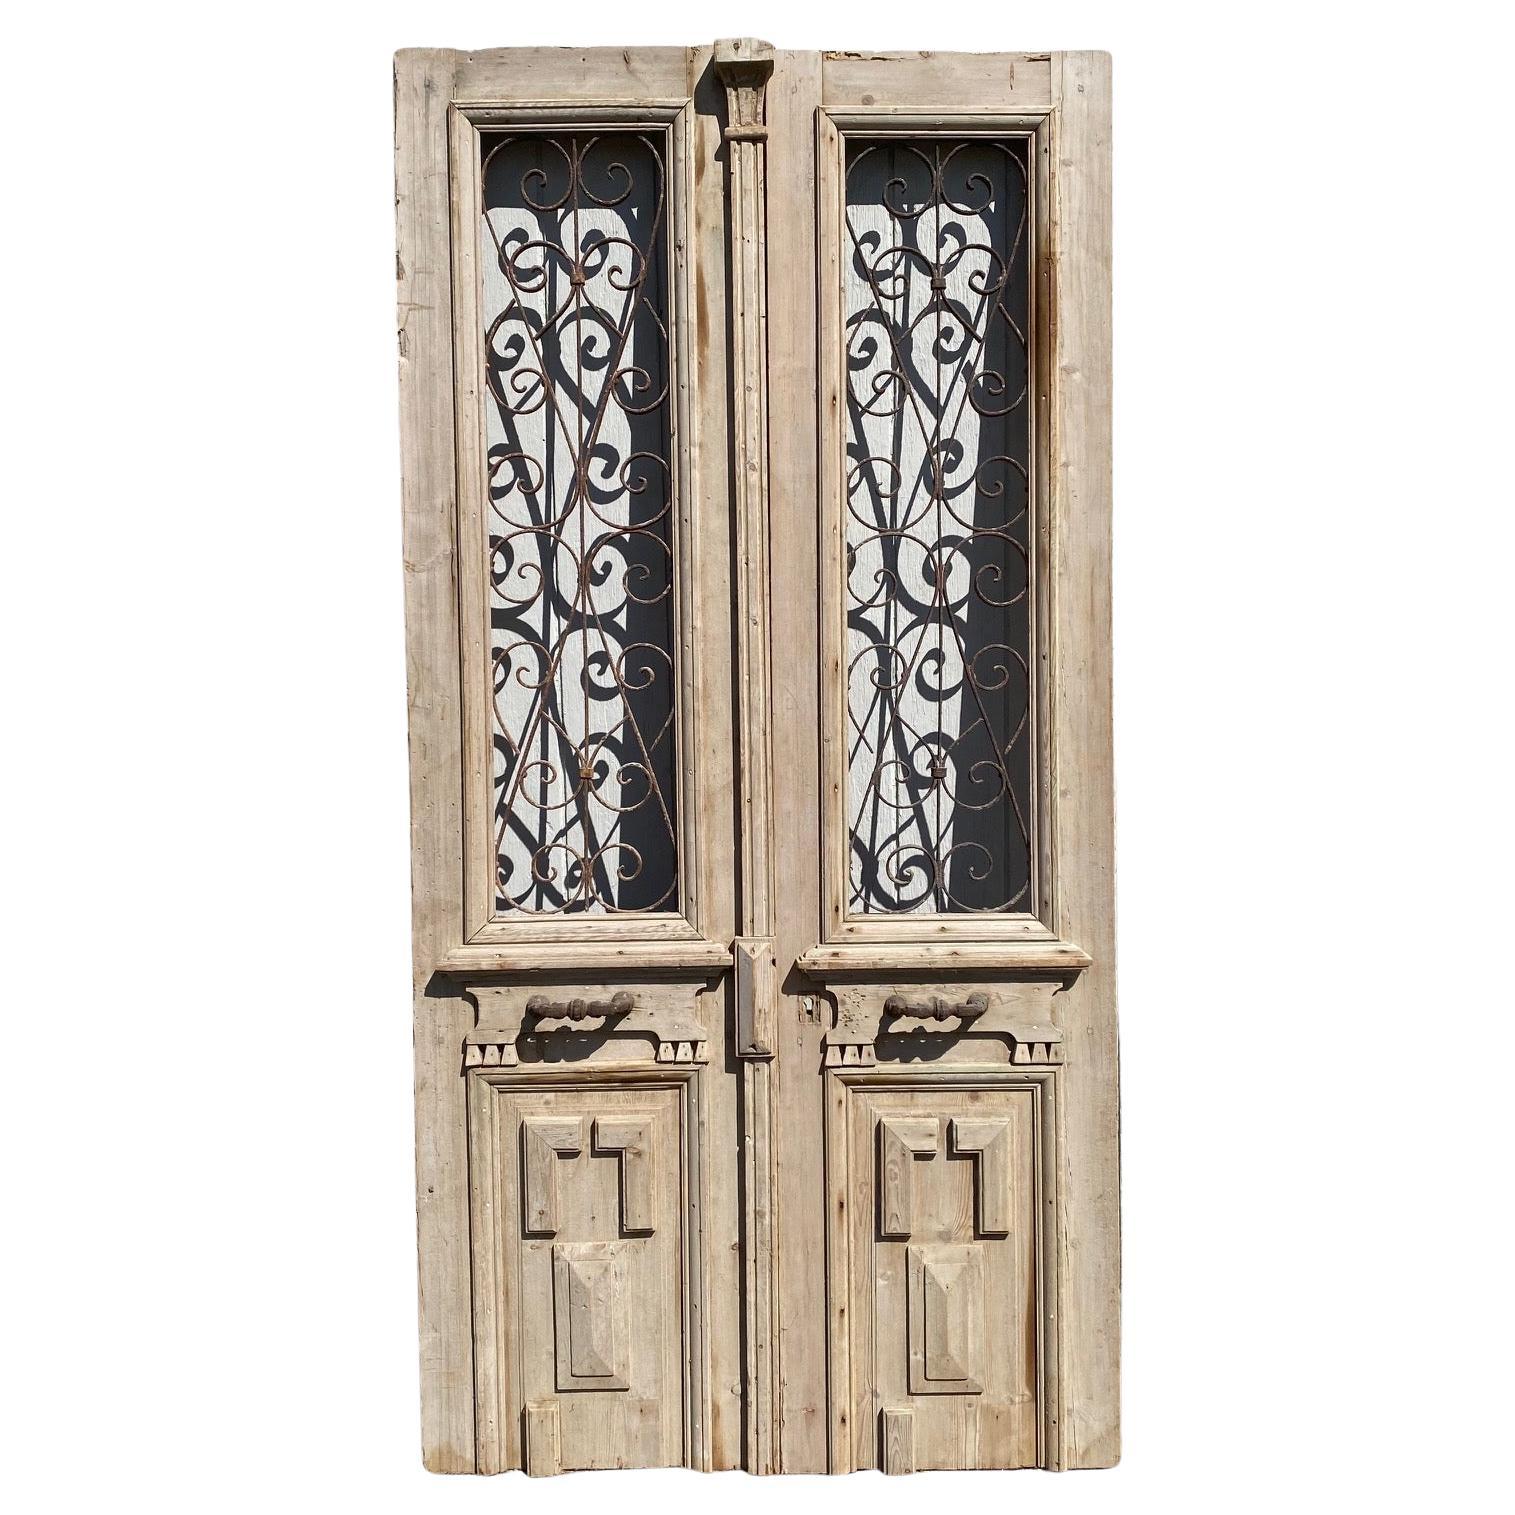 Pair of 19th Century French Doors with Curved Wrought Iron Panels